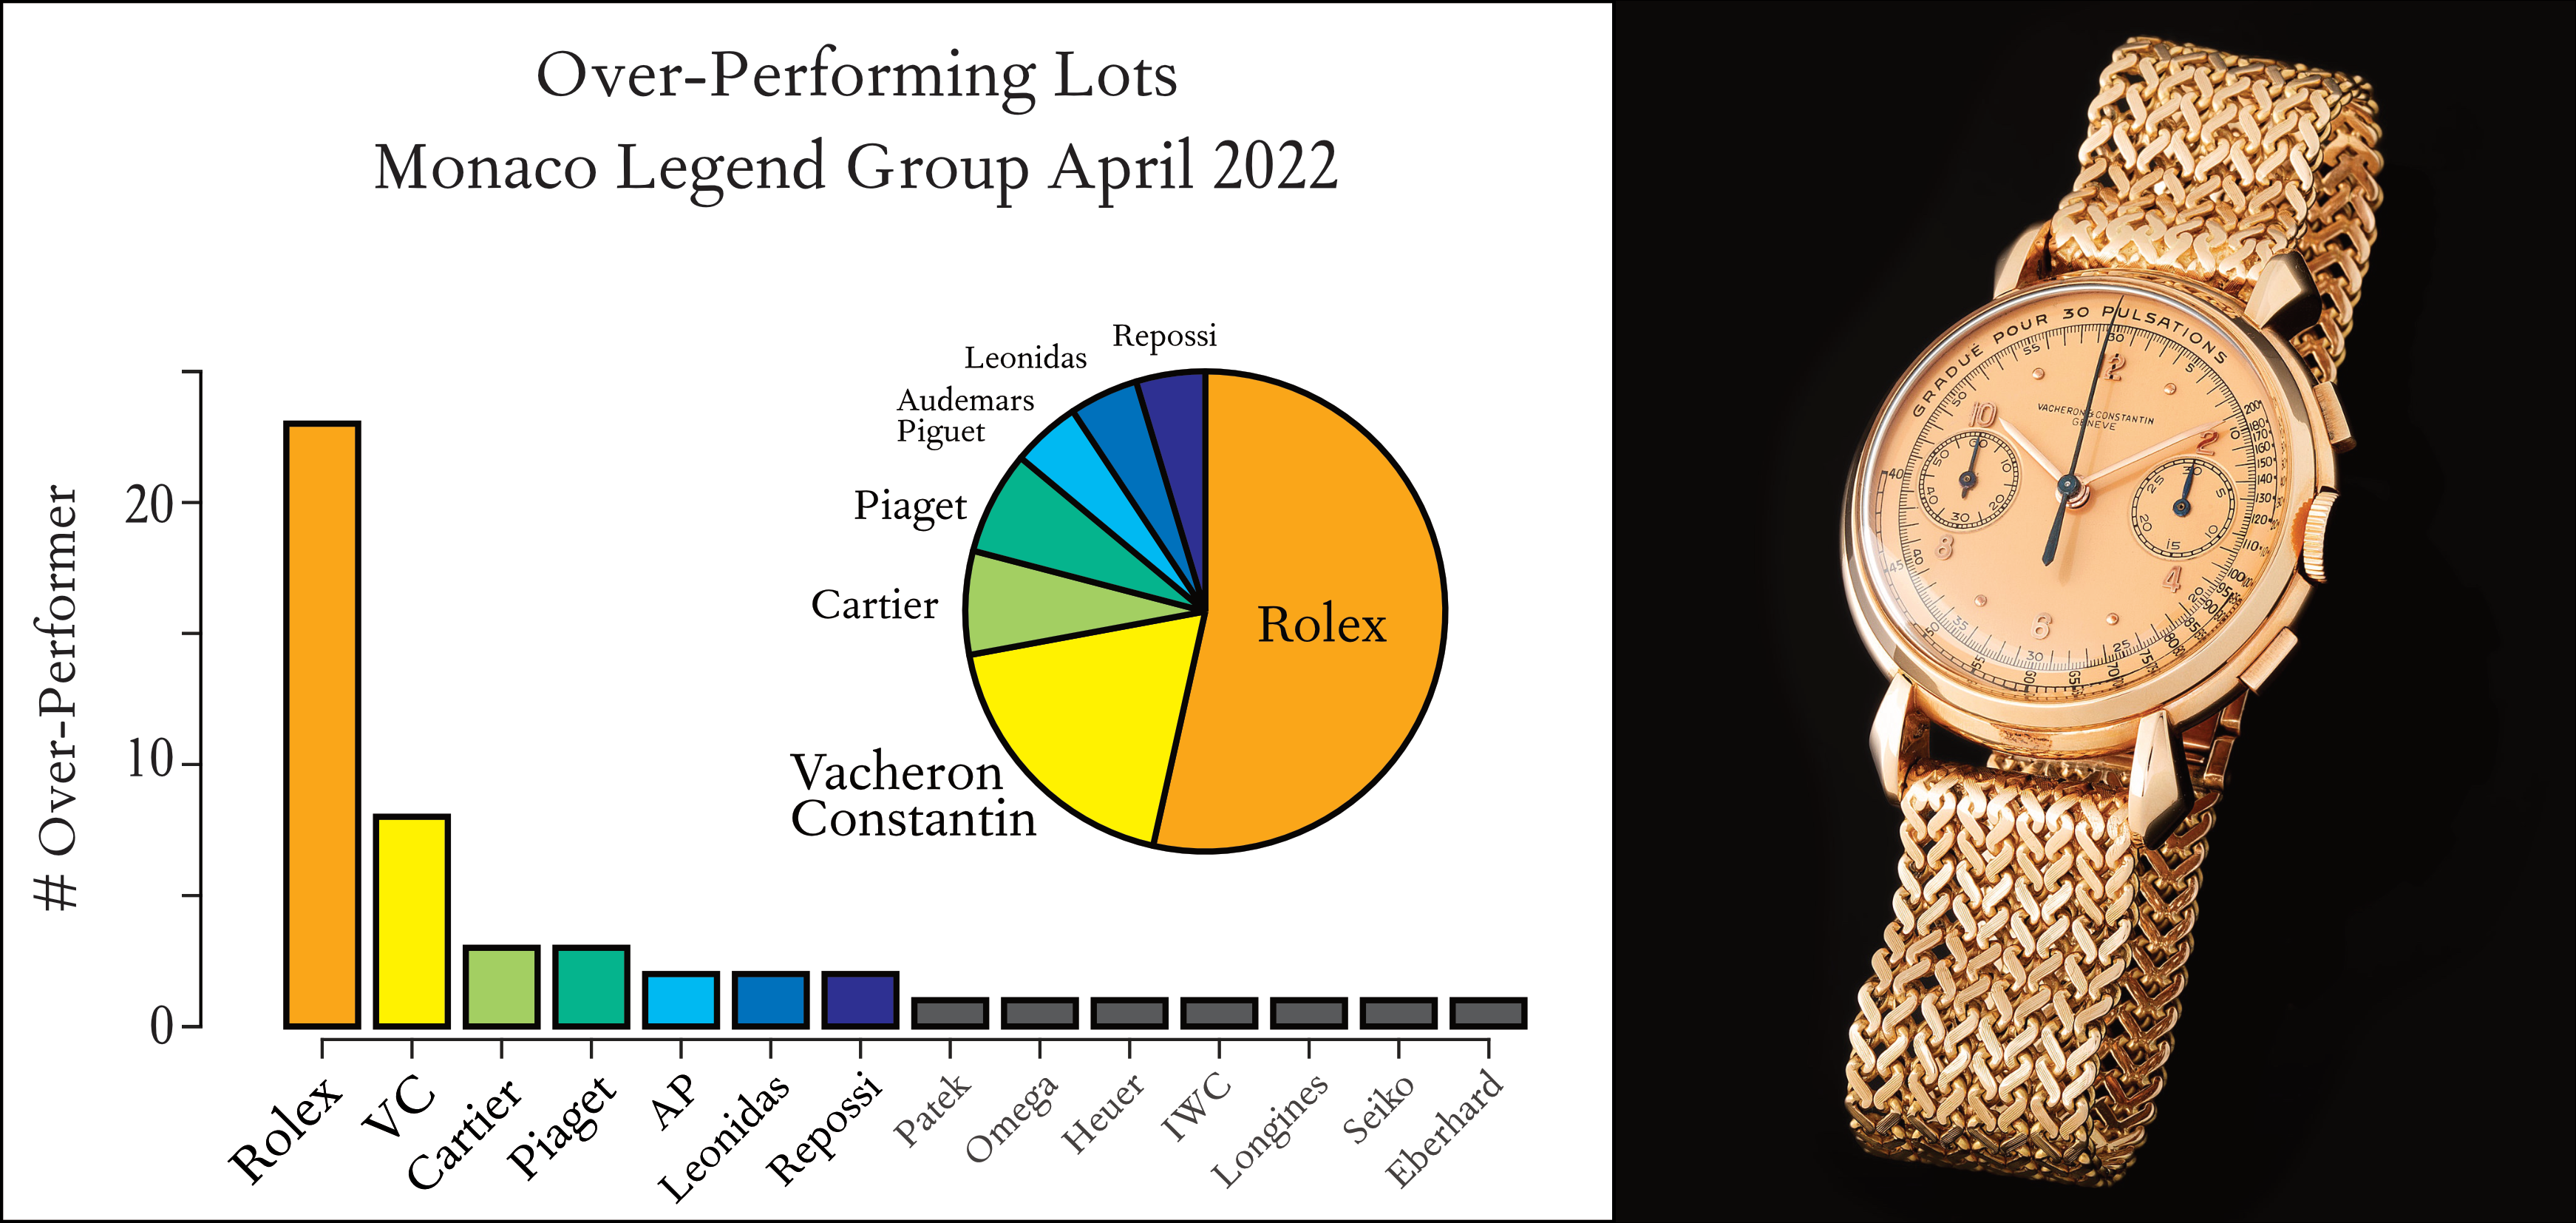 Distribution of Over-Achievers at the Monaco Legend Group Auction 2022